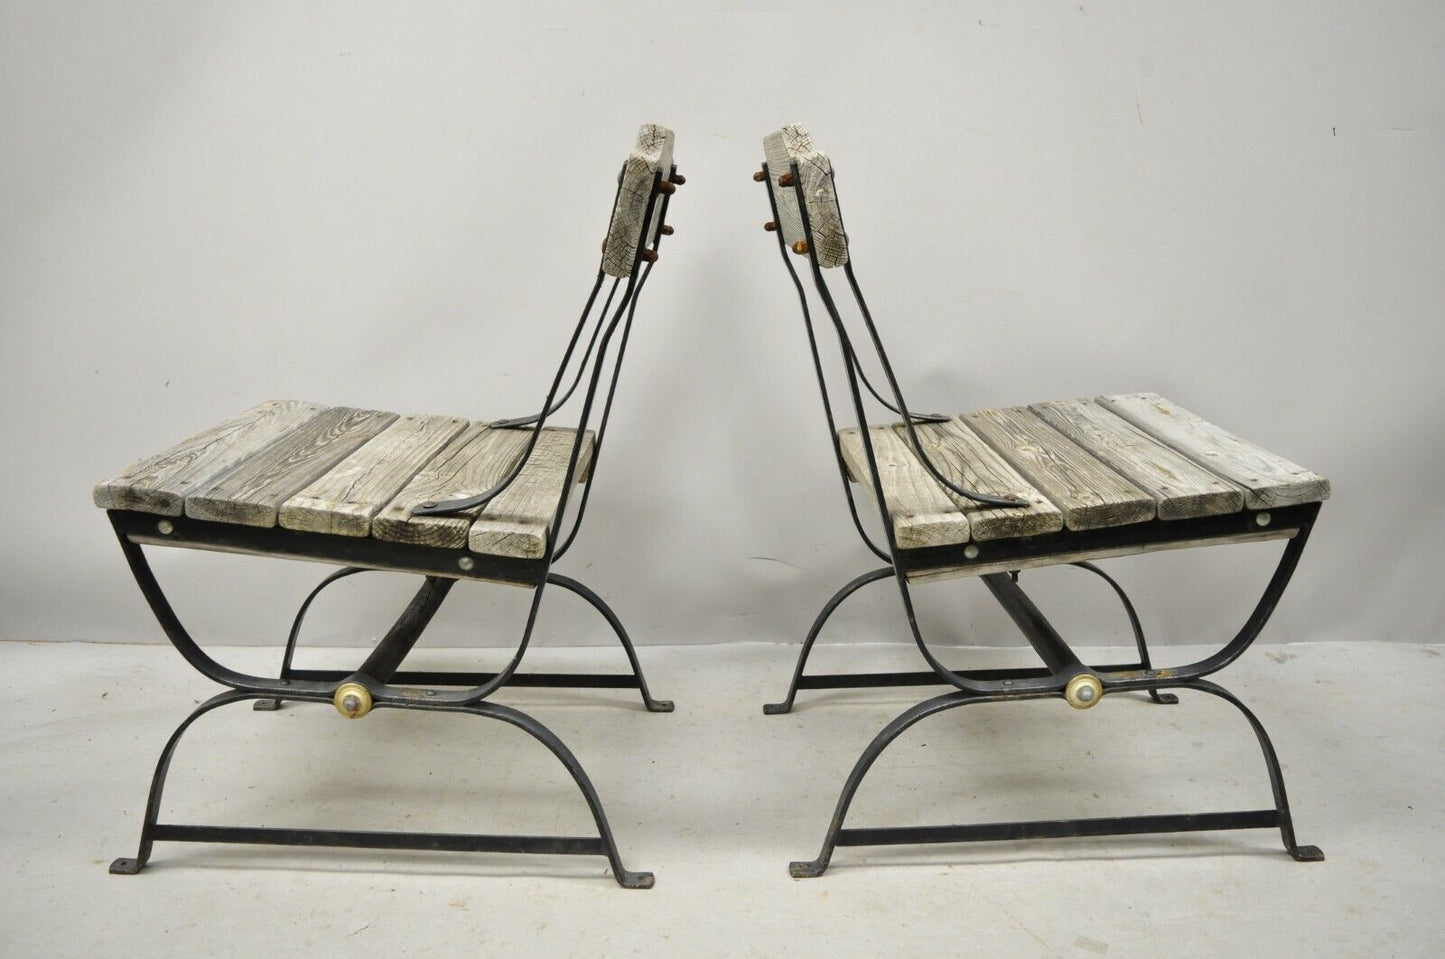 Antique French Industrial Wrought Iron Wooden Slat Seat Side Chairs - a Pair